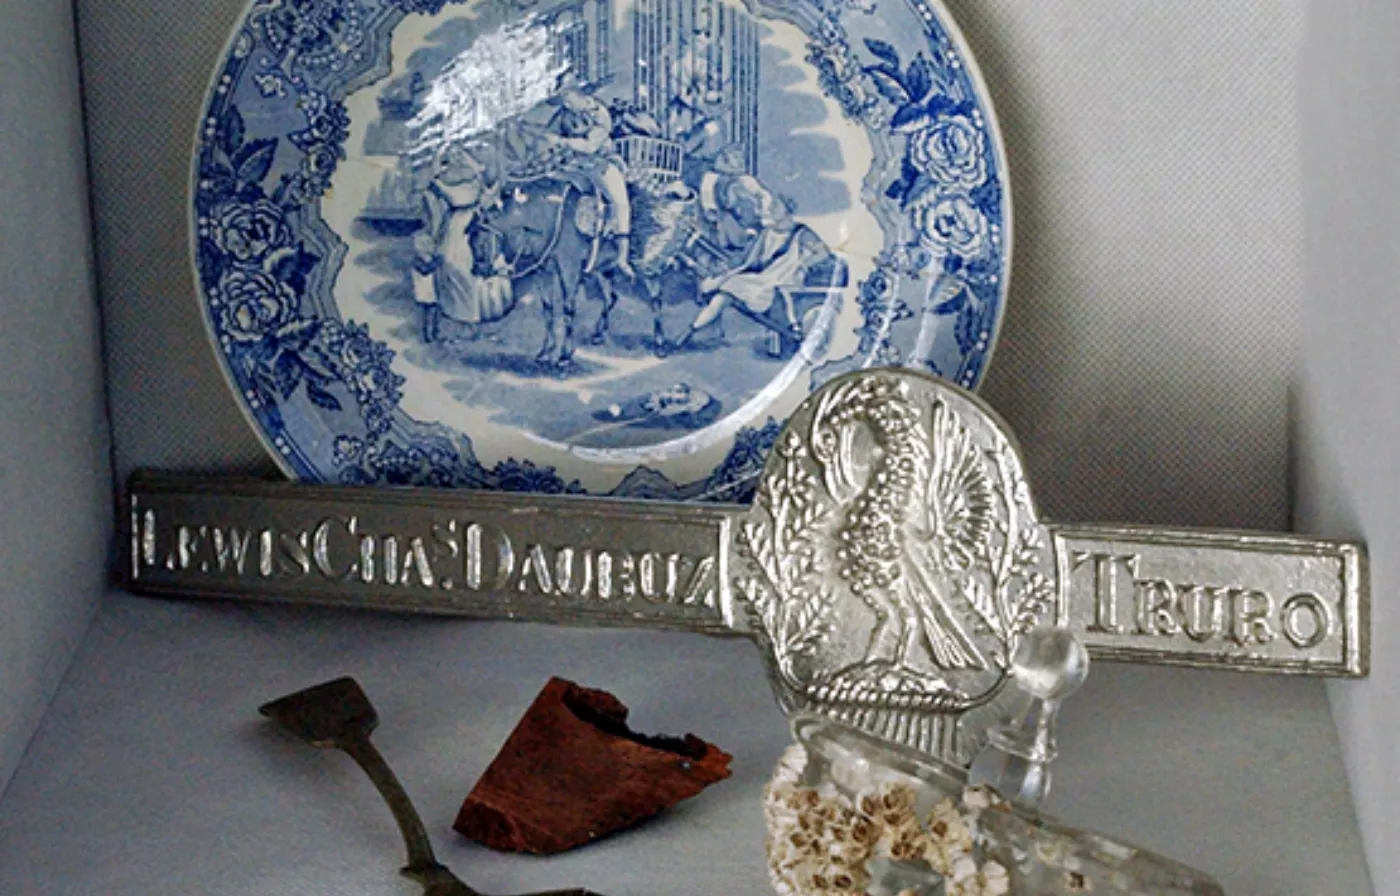 Plate and sword